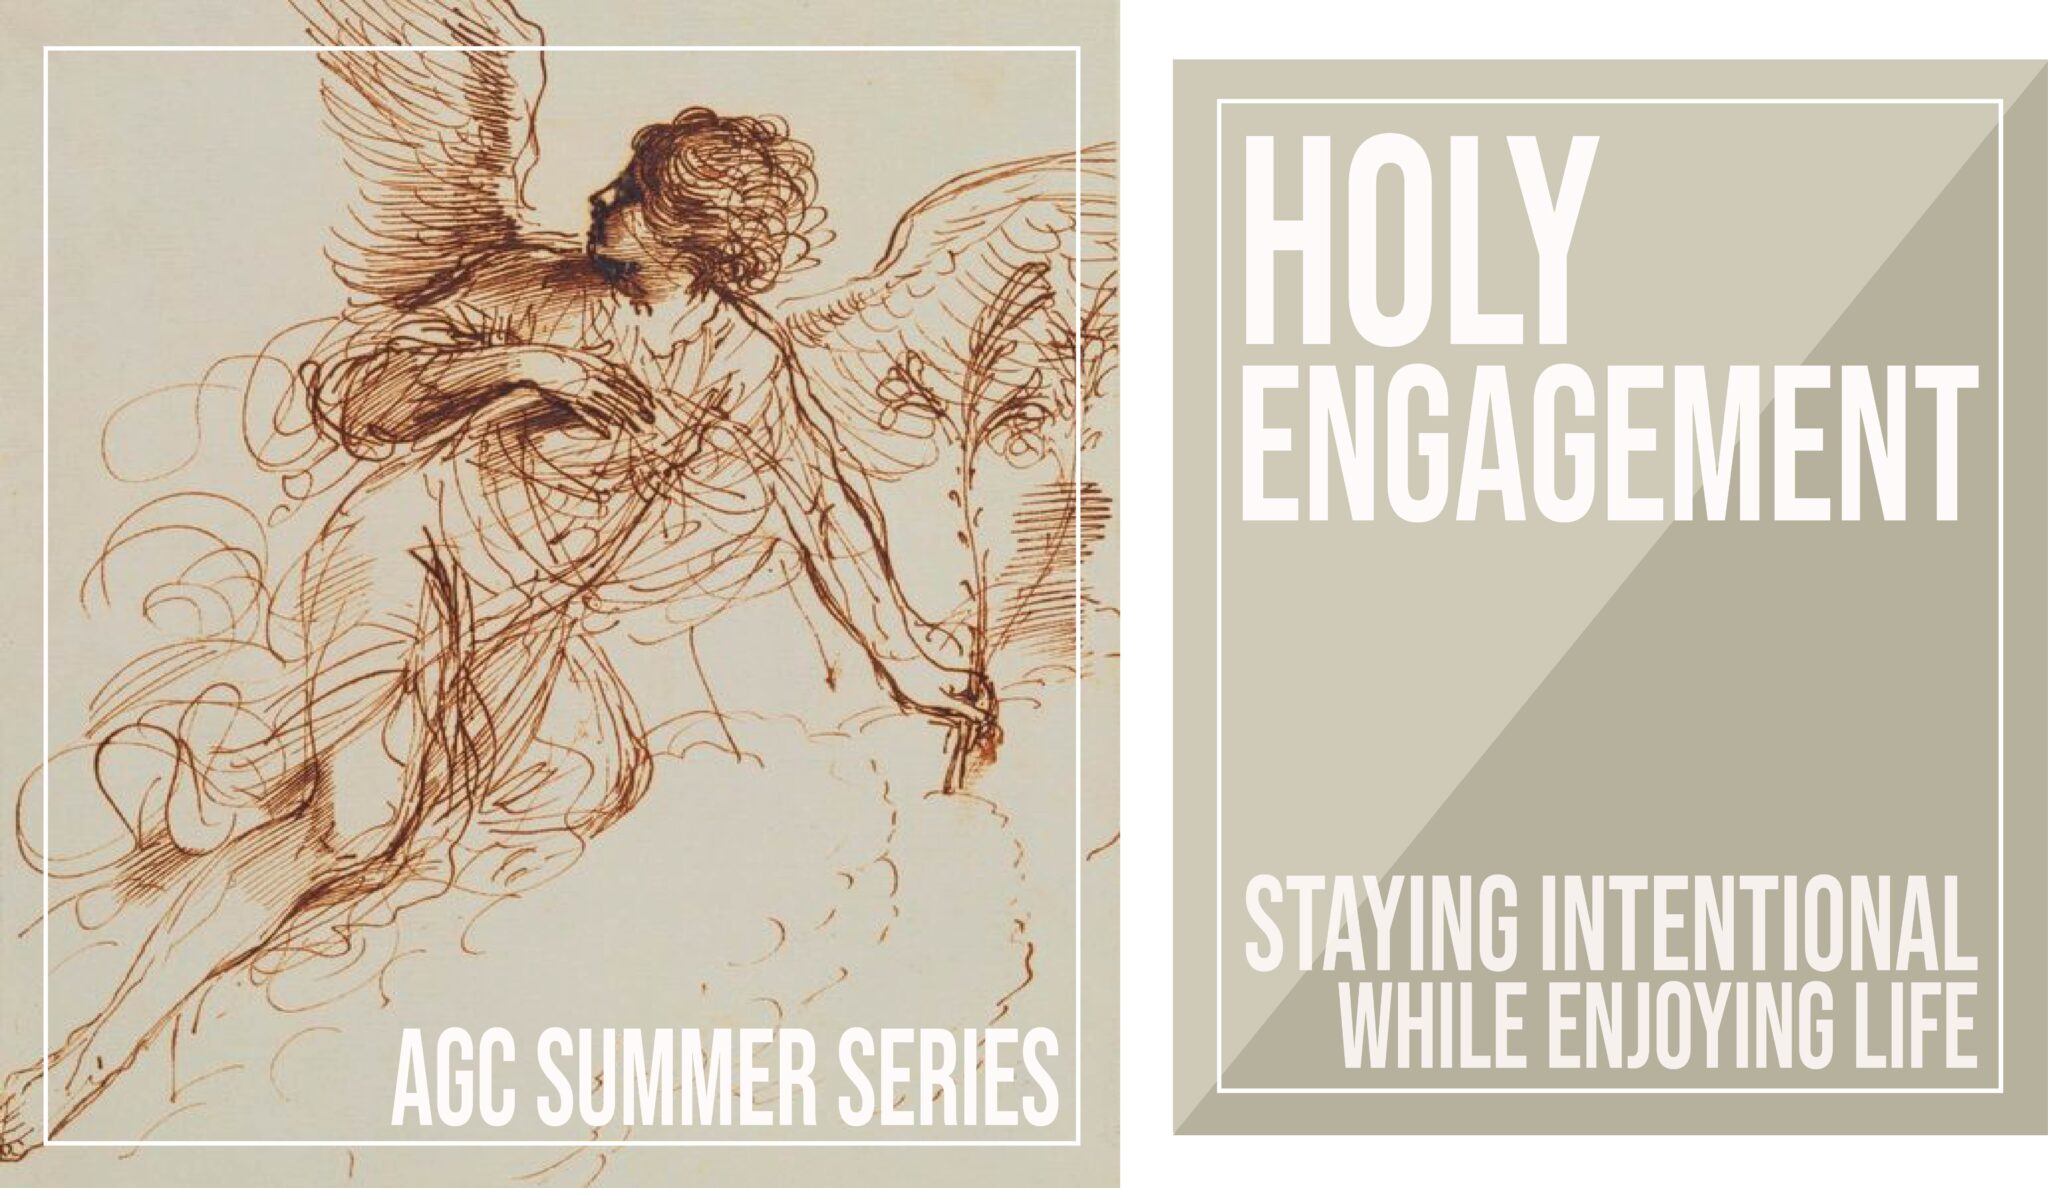 AGC Summer Series Holy Engagement Staying Intentional While Enjoying Life graphic